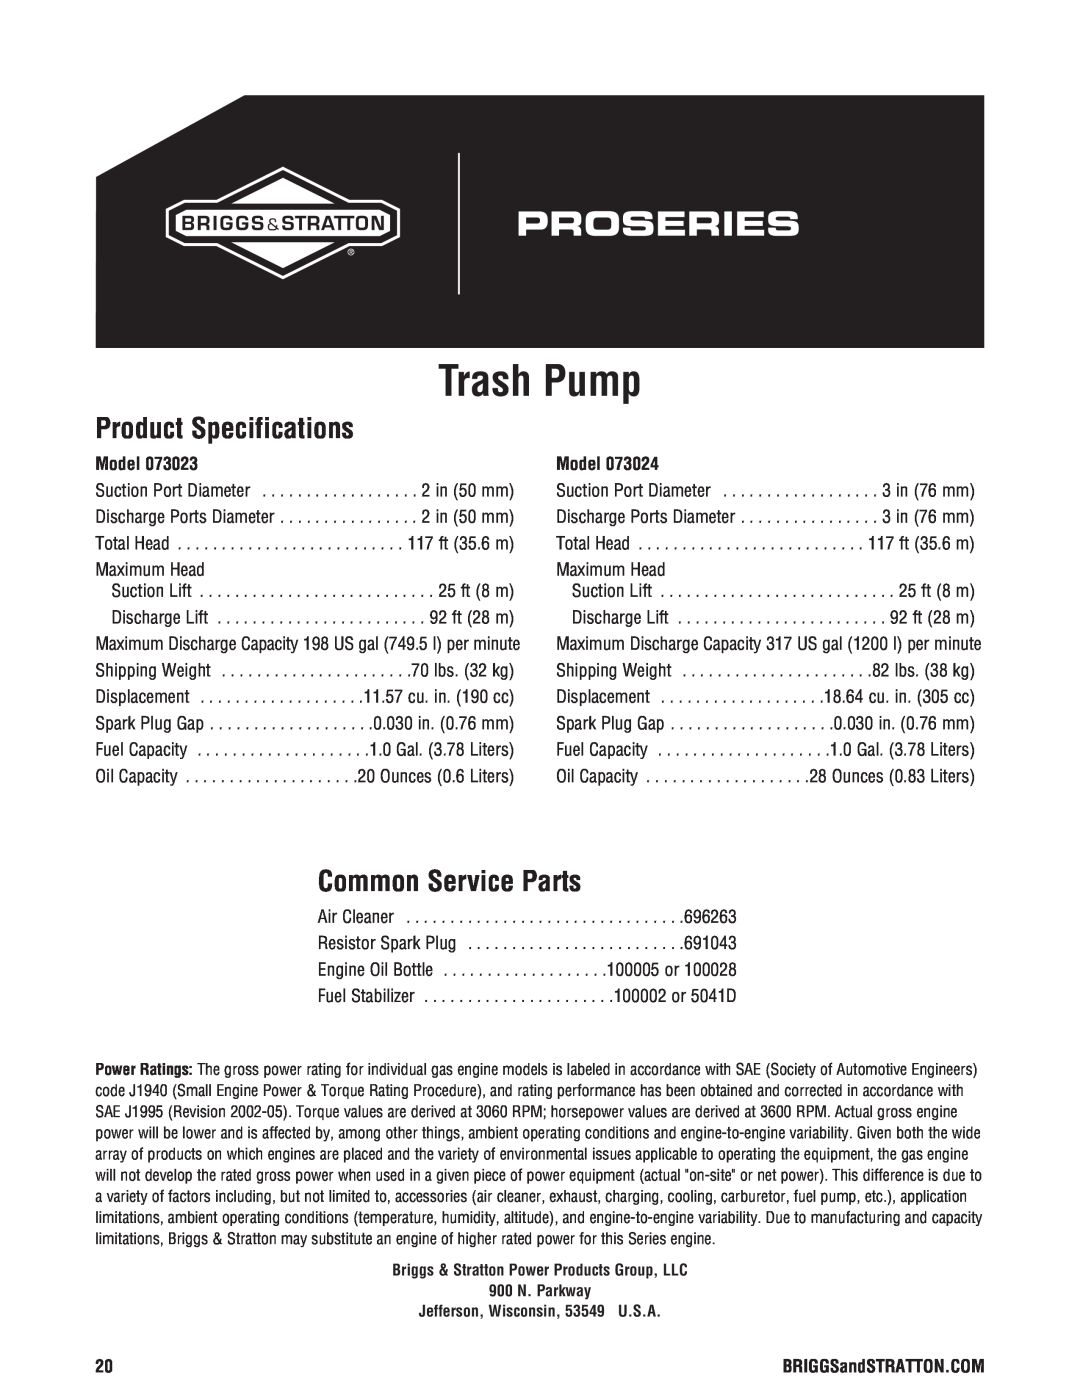 Briggs & Stratton 205378GS manual Product Specifications, Common Service Parts, Model, Trash Pump 